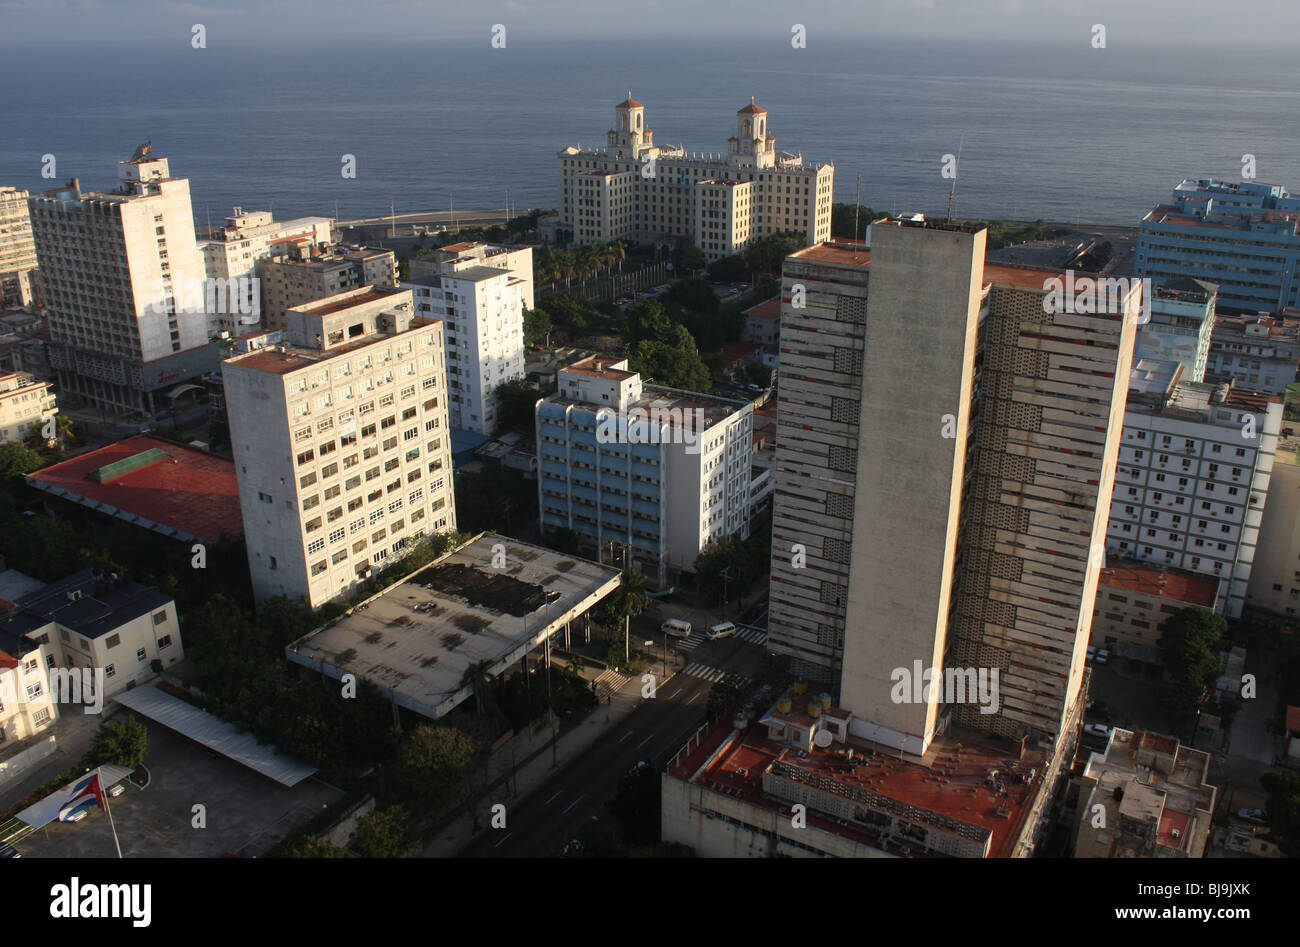 View of Havana hotels in Cuba taken from the Hotel Tryp Habana Libre Stock Photo